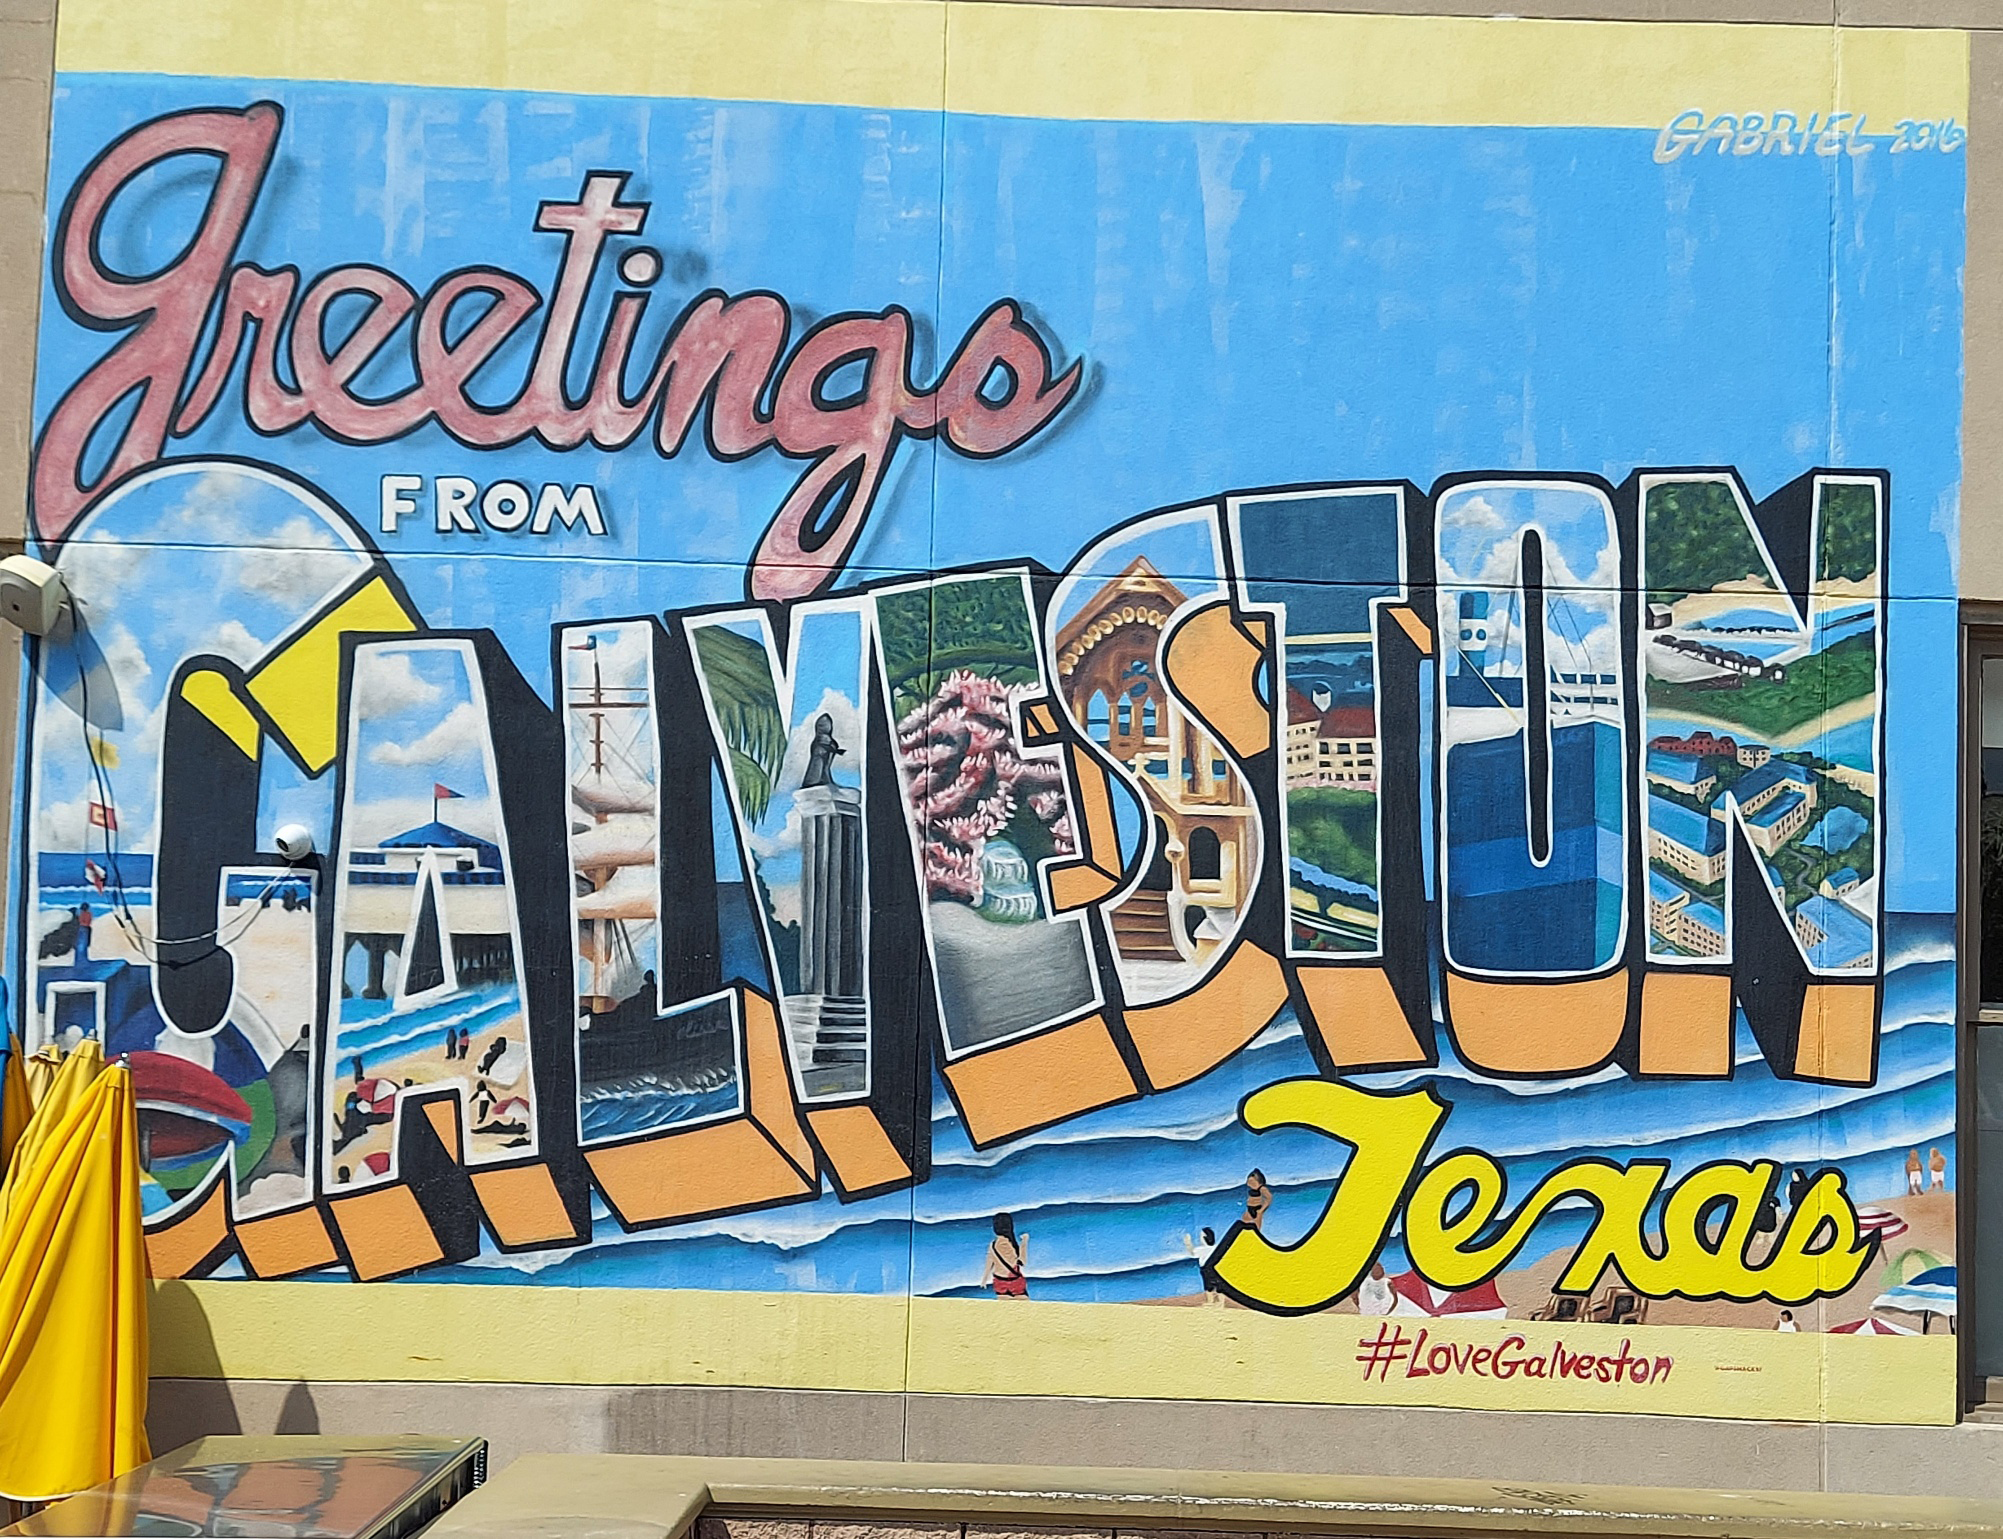  Iconic 'Greetings from Galveston, Texas' Sign Adorning Yaga's Restaurant, a Coastal Landmark with Vibrant Colors and Vintage Charm